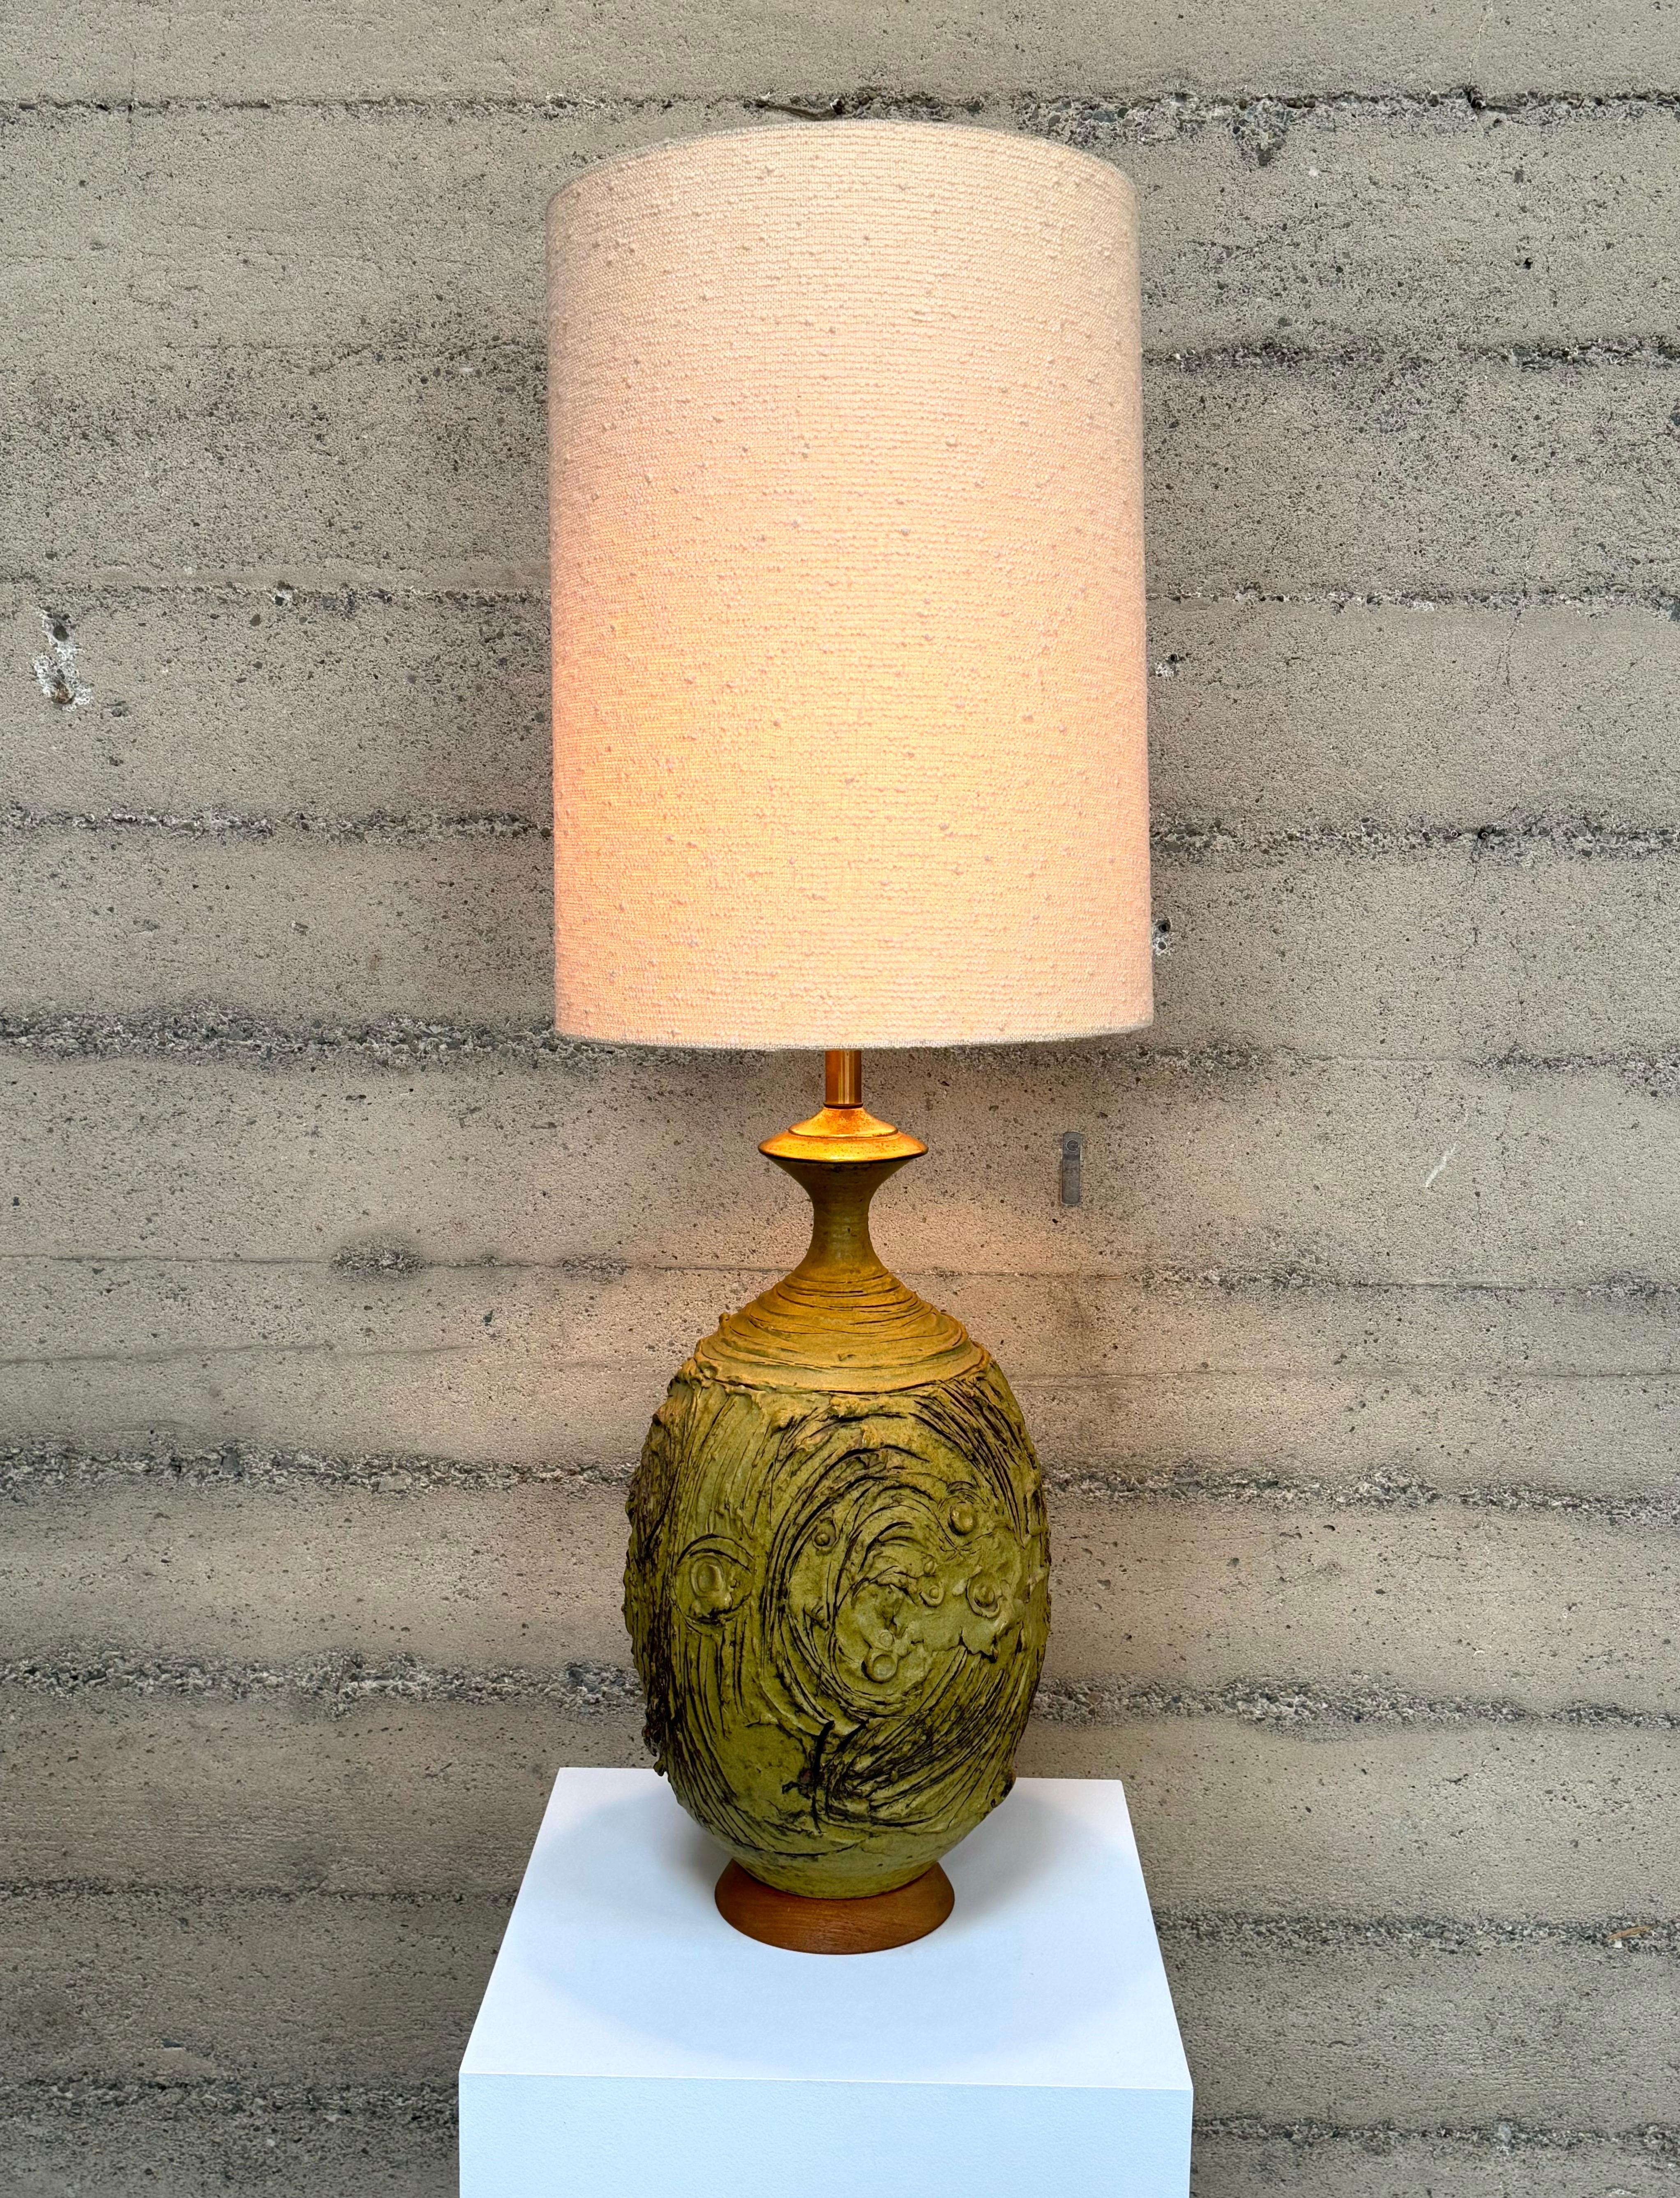 Stoneware ceramic table lamp by California ceramic artist Victoria Littlejohn, this is an earthy textural ceramic lamp in a mustard glaze with a walnut base. The lamp has the original shade which can be included if desired which has a nubby textural